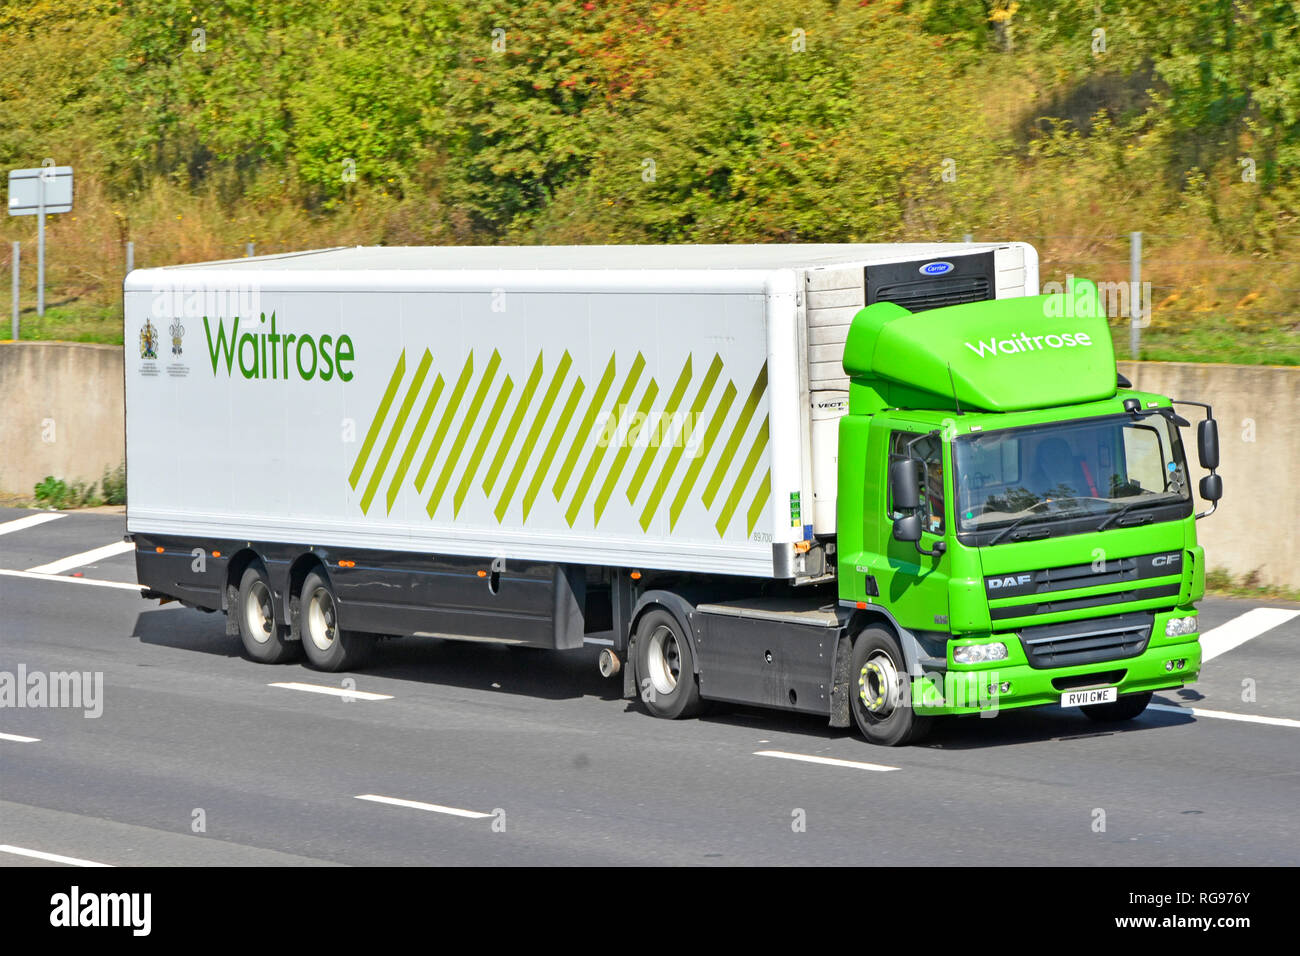 Side & front view Waitrose supermarket retail business food supply chain store delivery lorry truck & driver trailer logo & Royal Warrant England UK Stock Photo